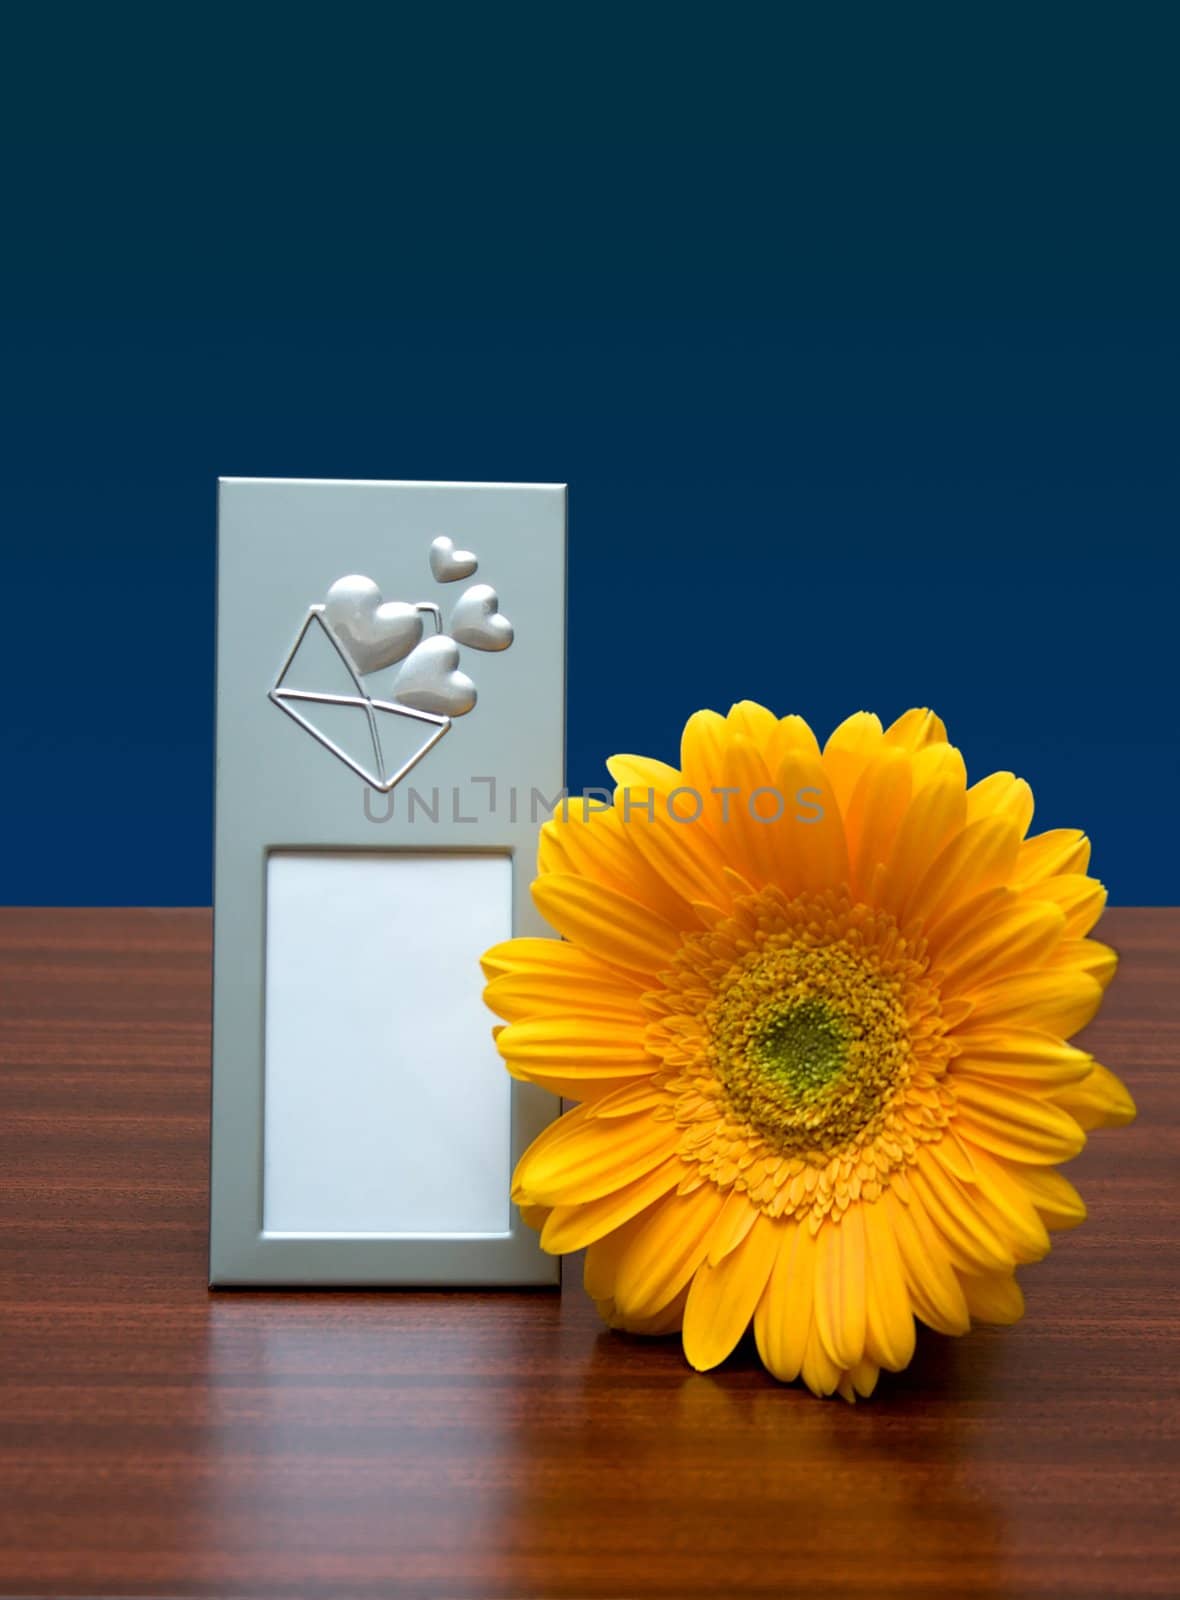 blank photo frame and yellow flower on dark-blue